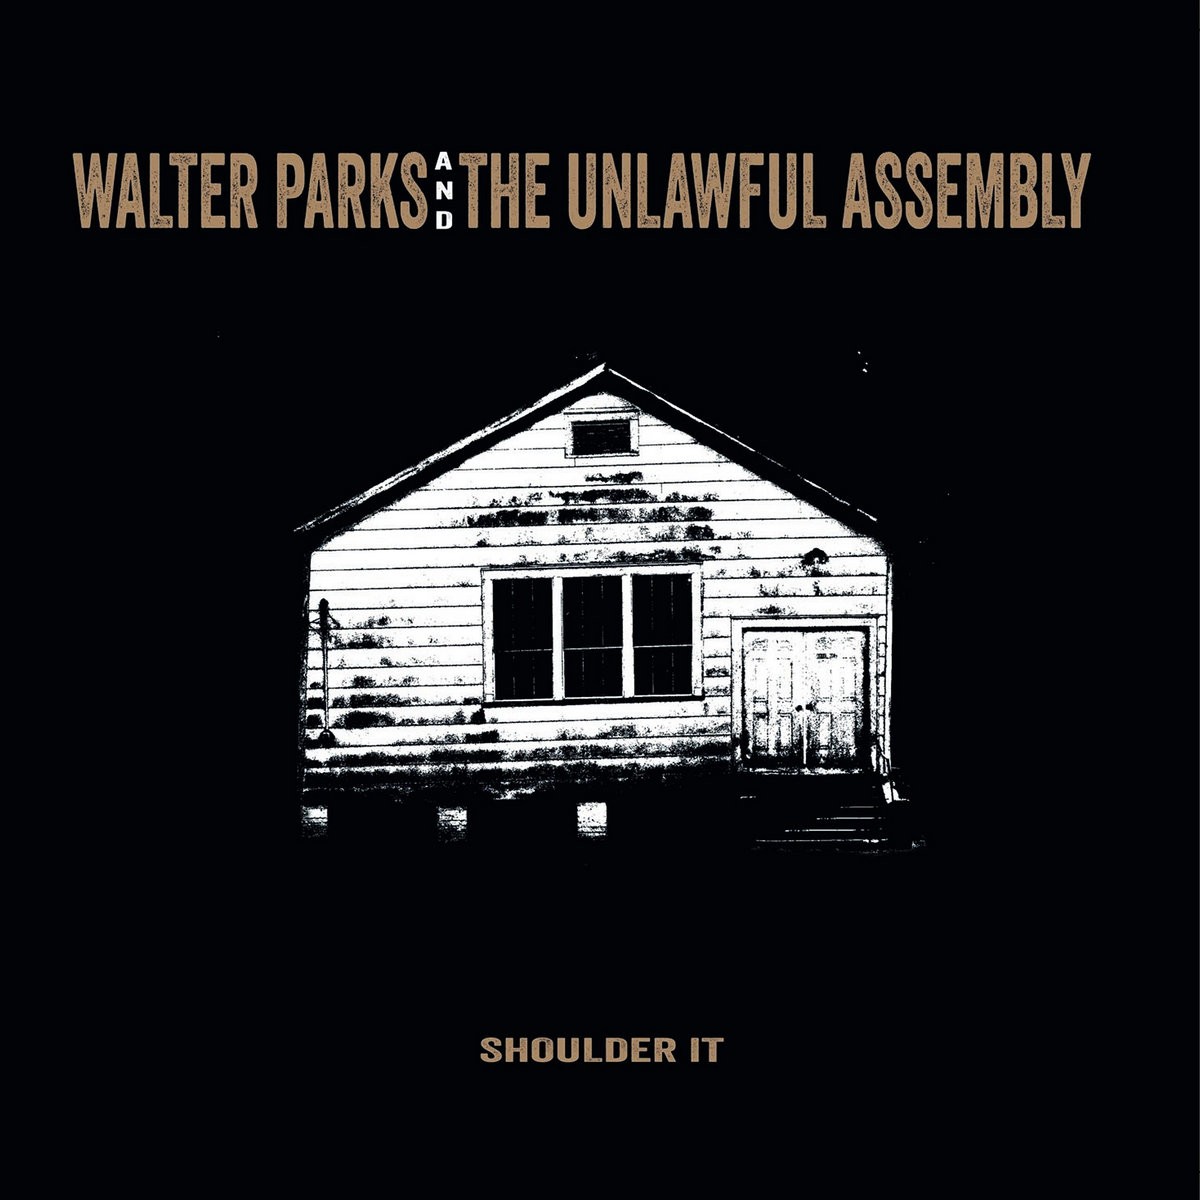 Walter Parks and the Unlawful Assembly - Shoulder It